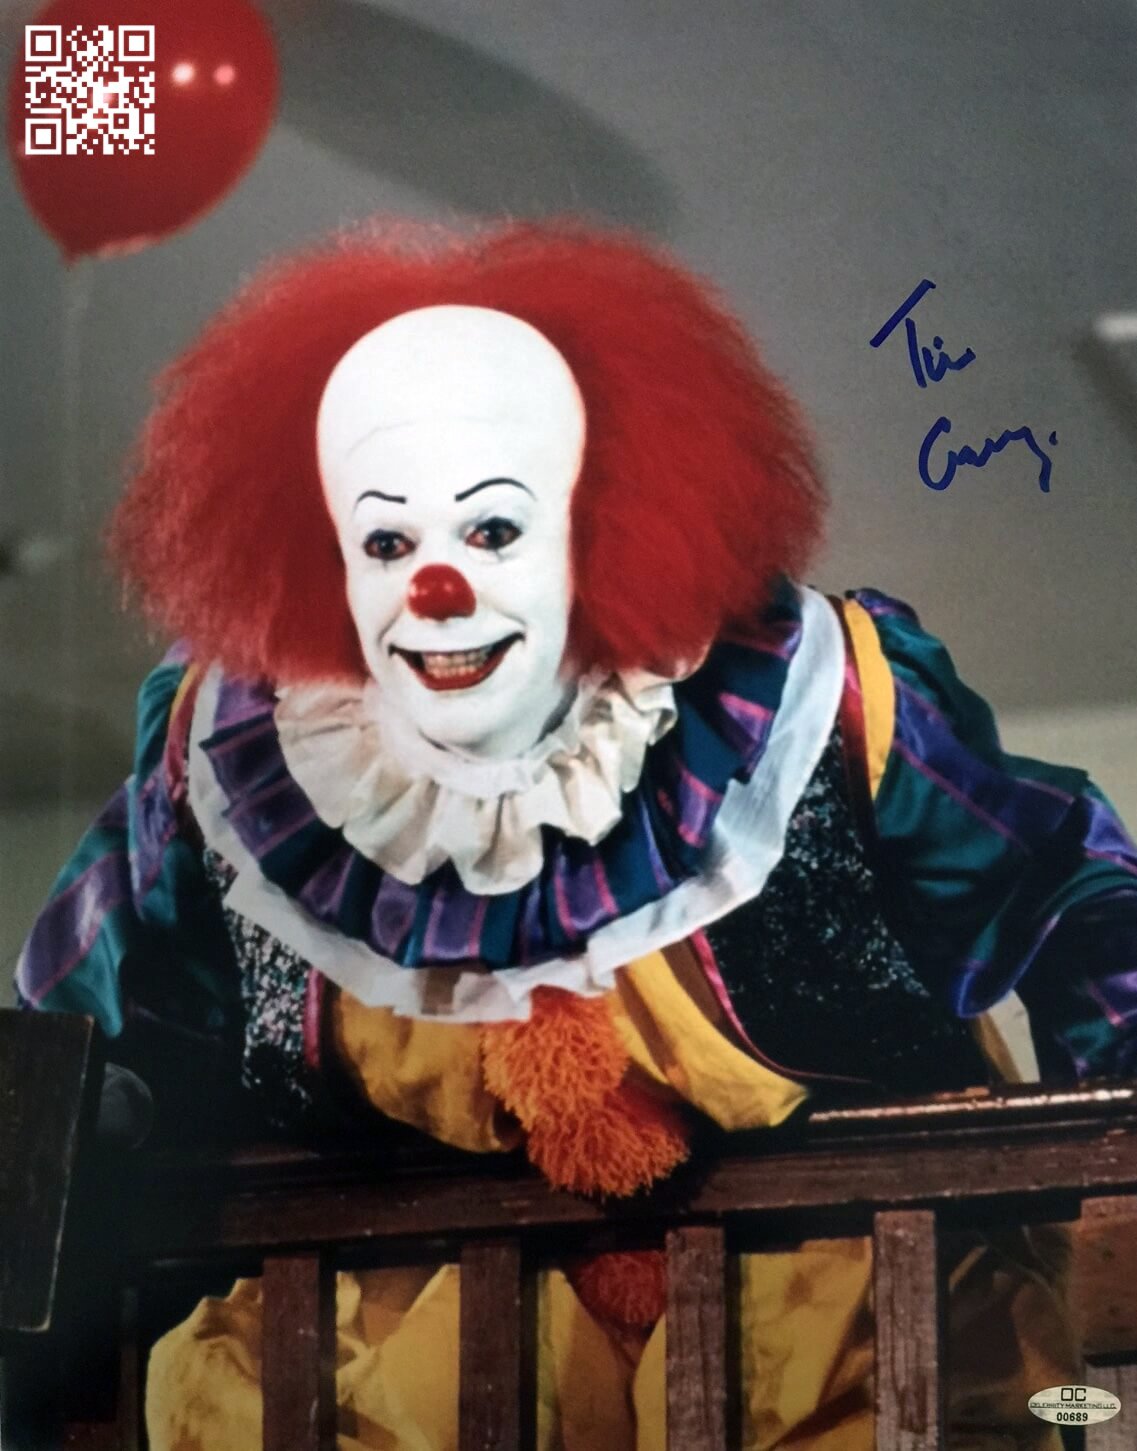 Tim Curry as Penny Wise Signed & Mounted 8 x 10" Autographed Photo (Reprint 1921) Great Gift Idea.